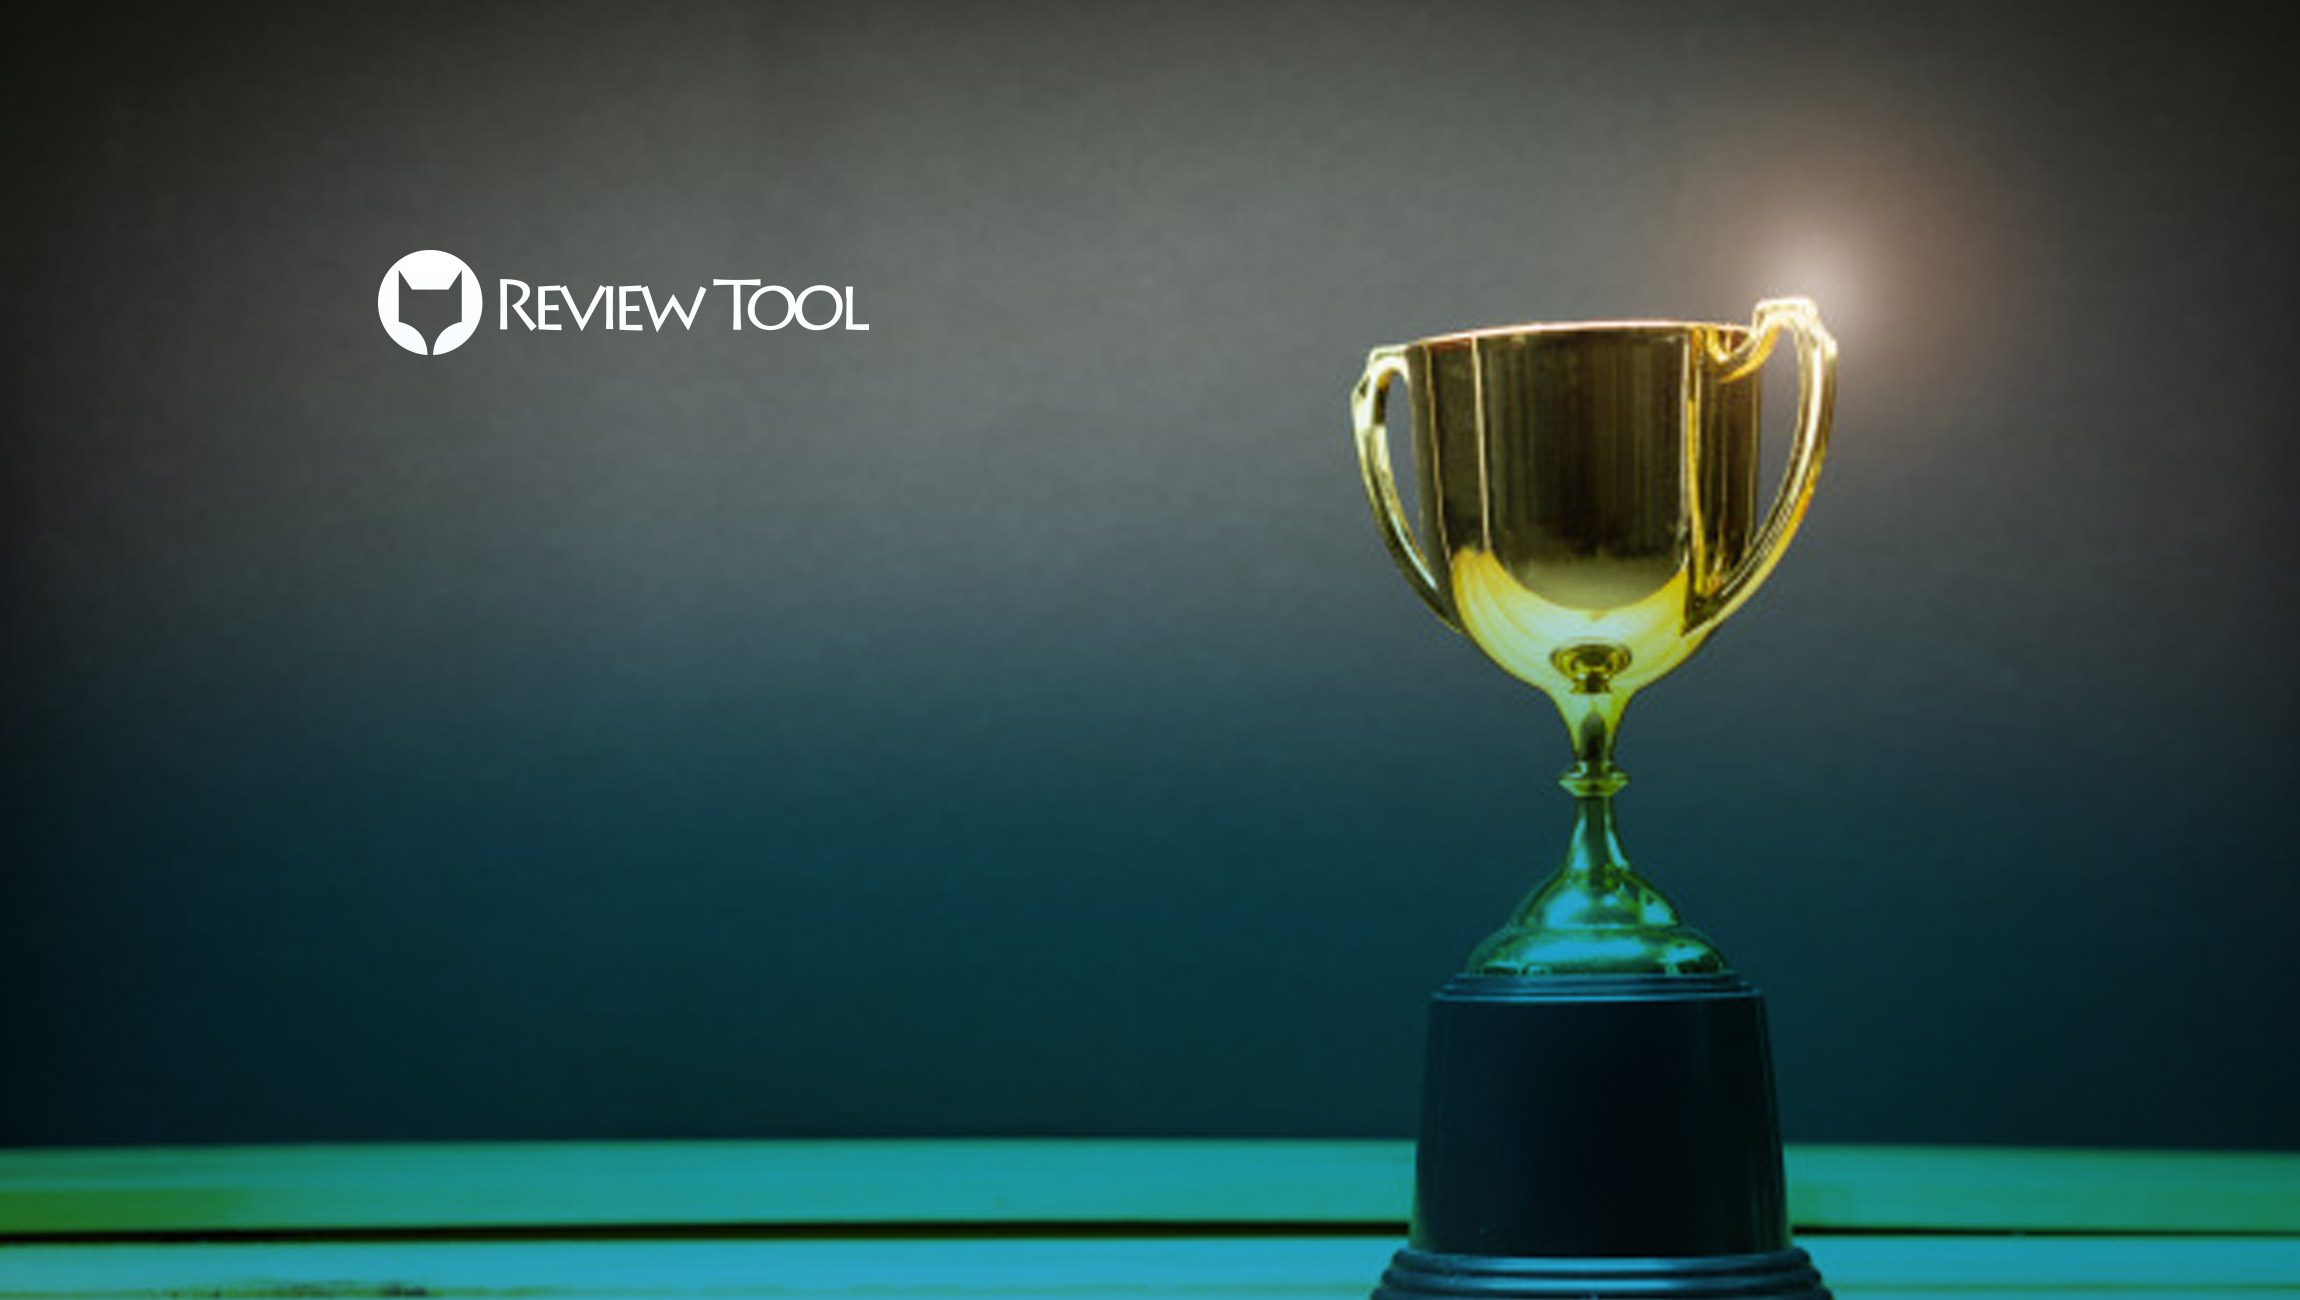 Review Tool, the Online Review Management Software, Receives Awards